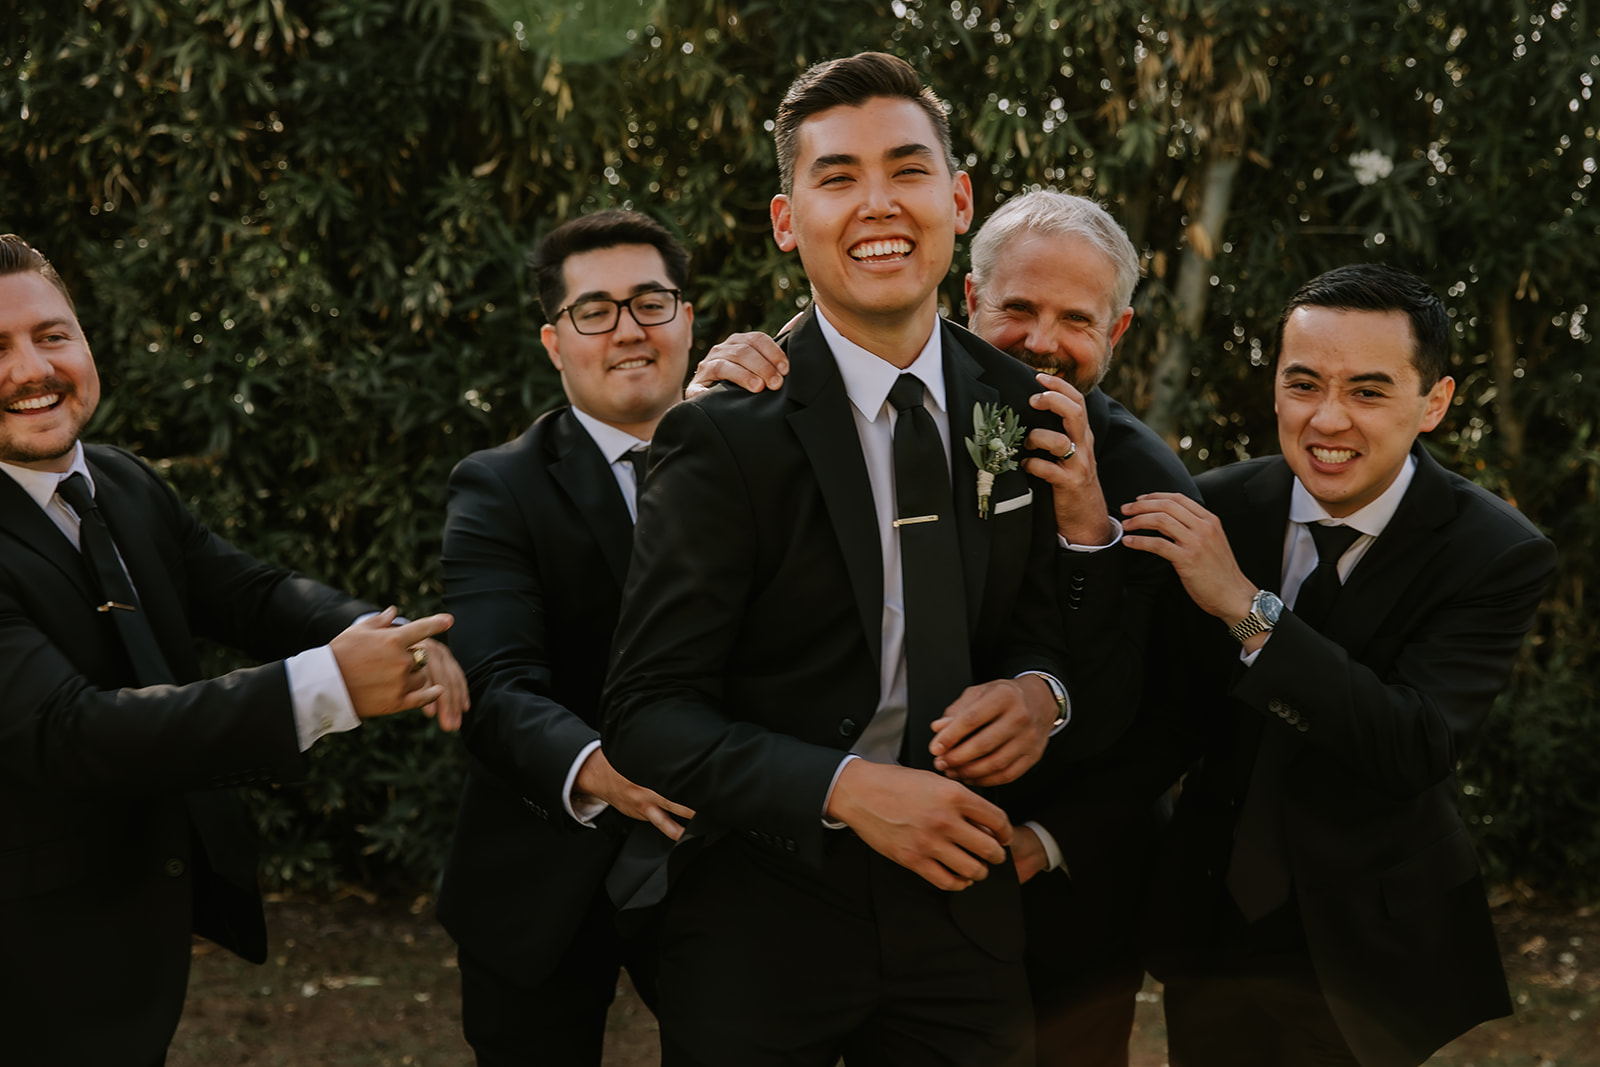 groom being pushed around by his groomsmen having fun before the ceremony